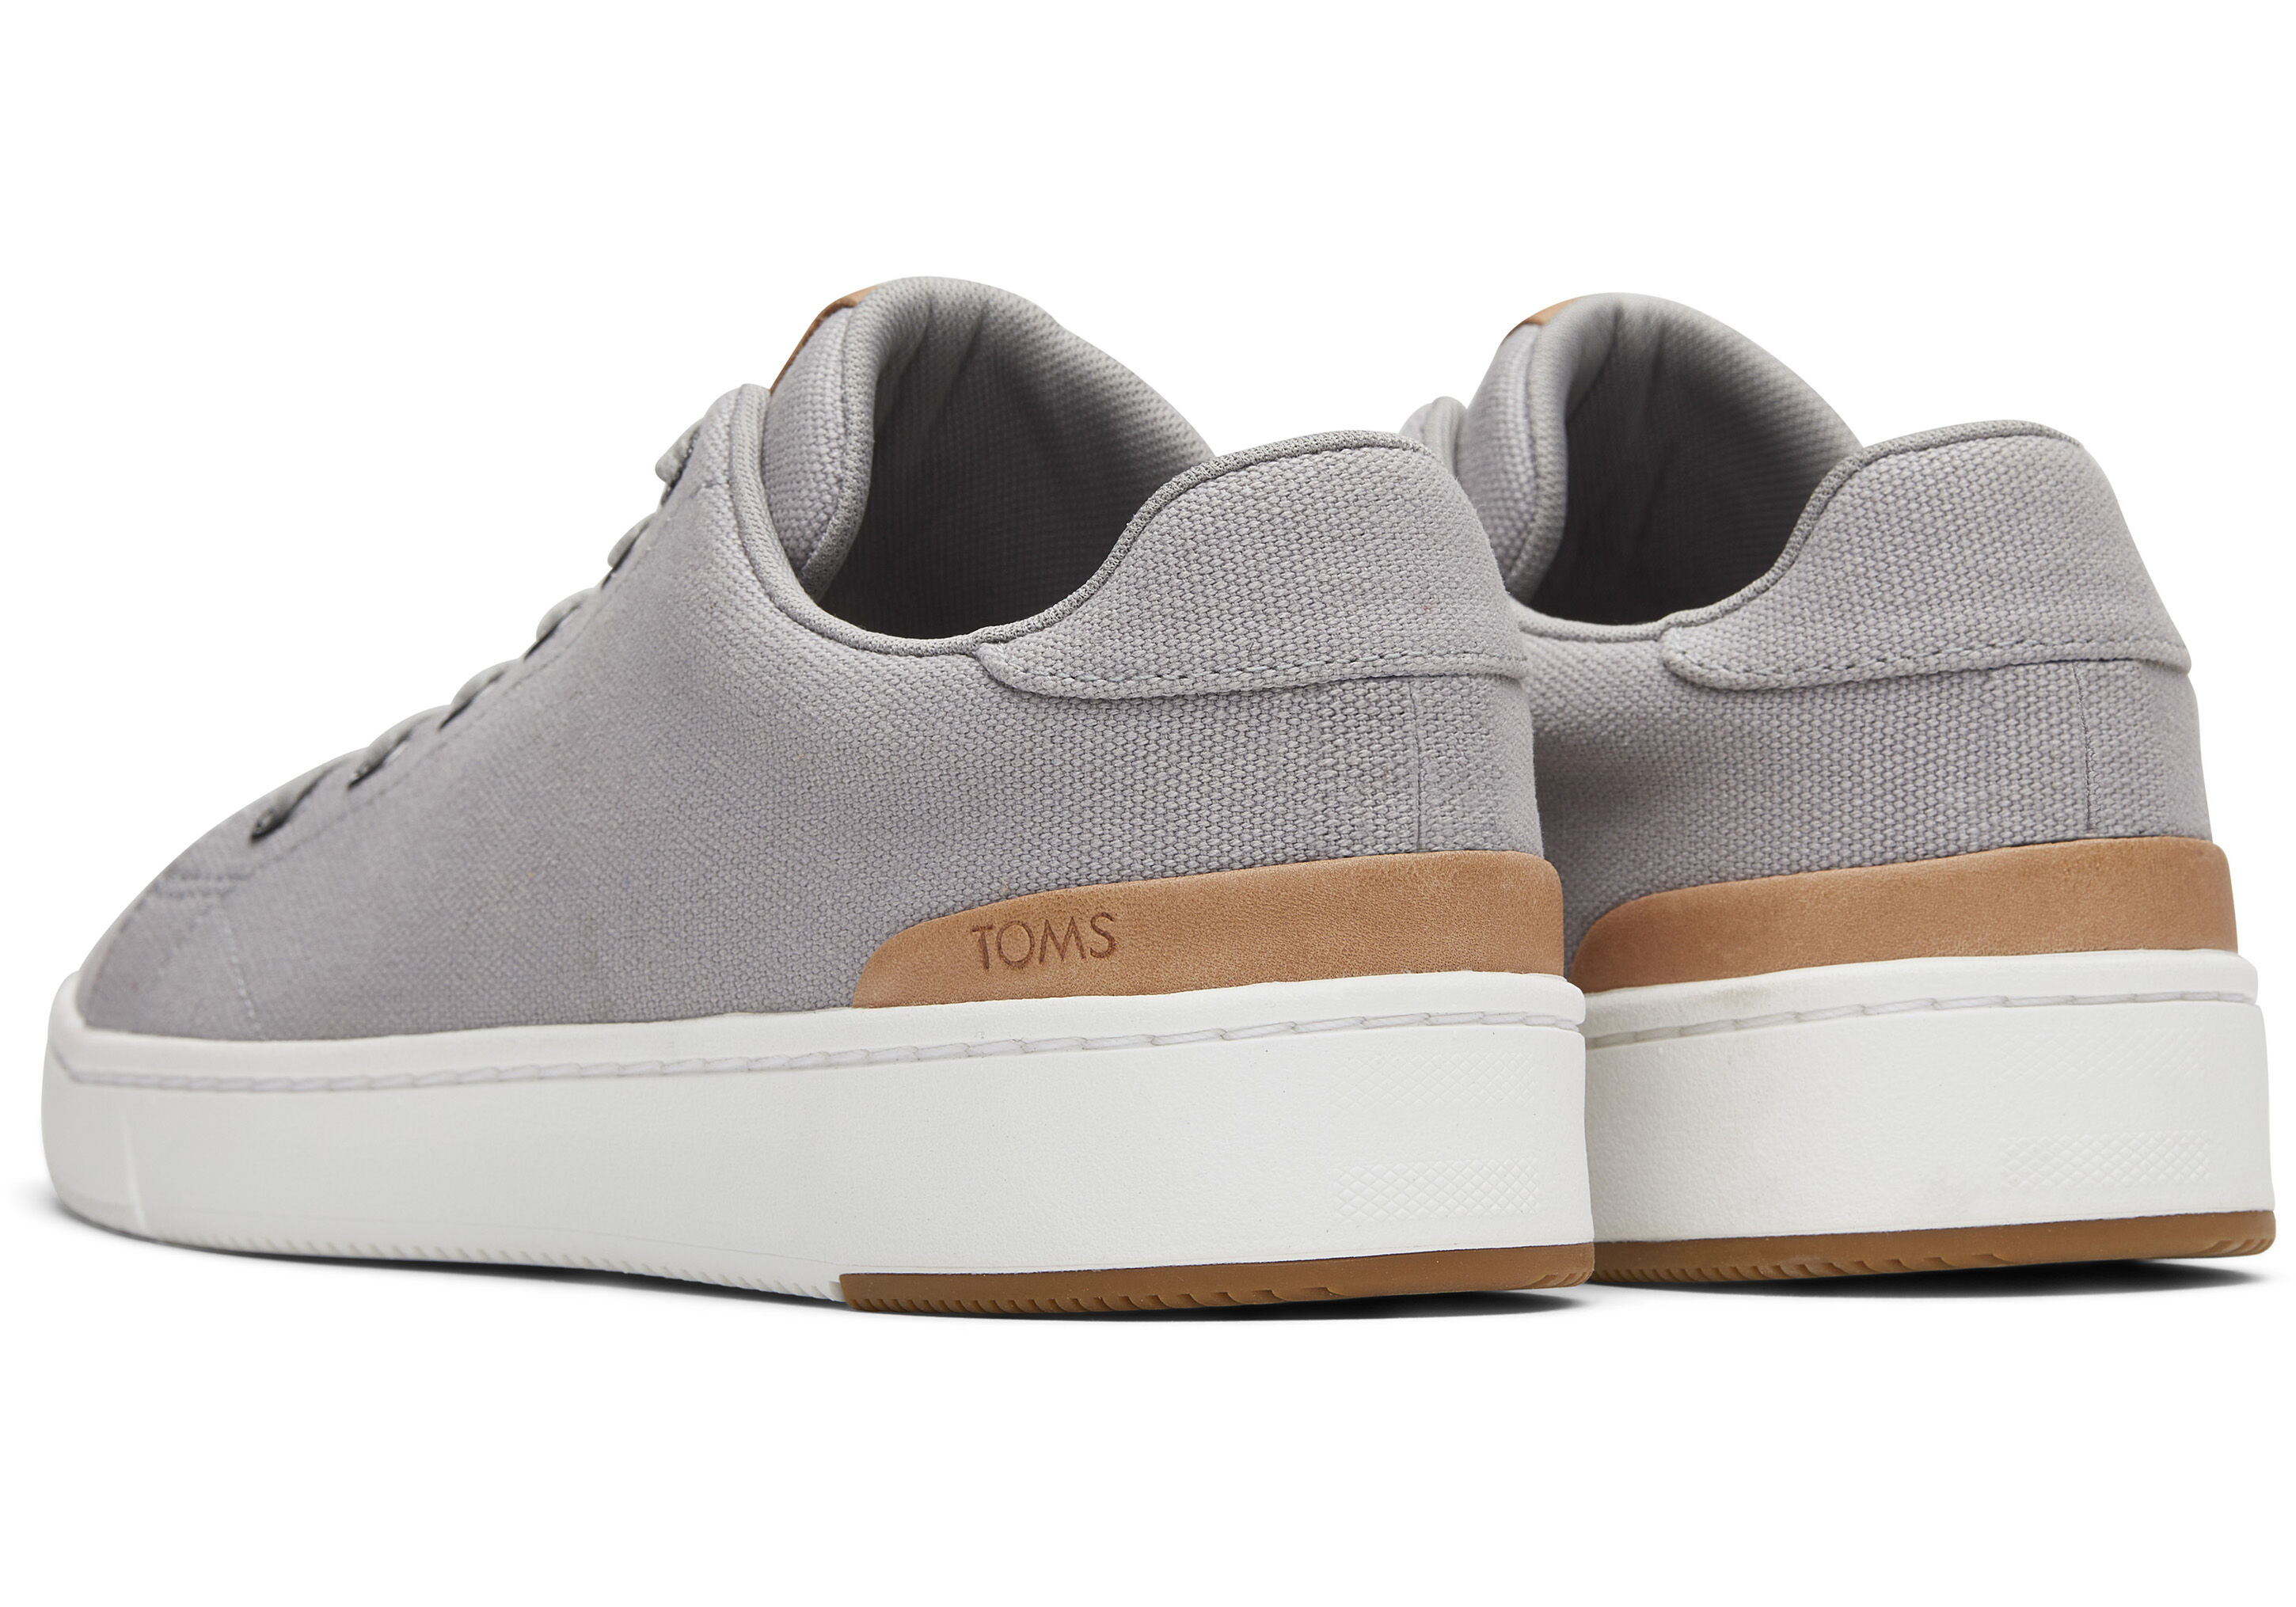 Share more than 313 toms grey sneakers best